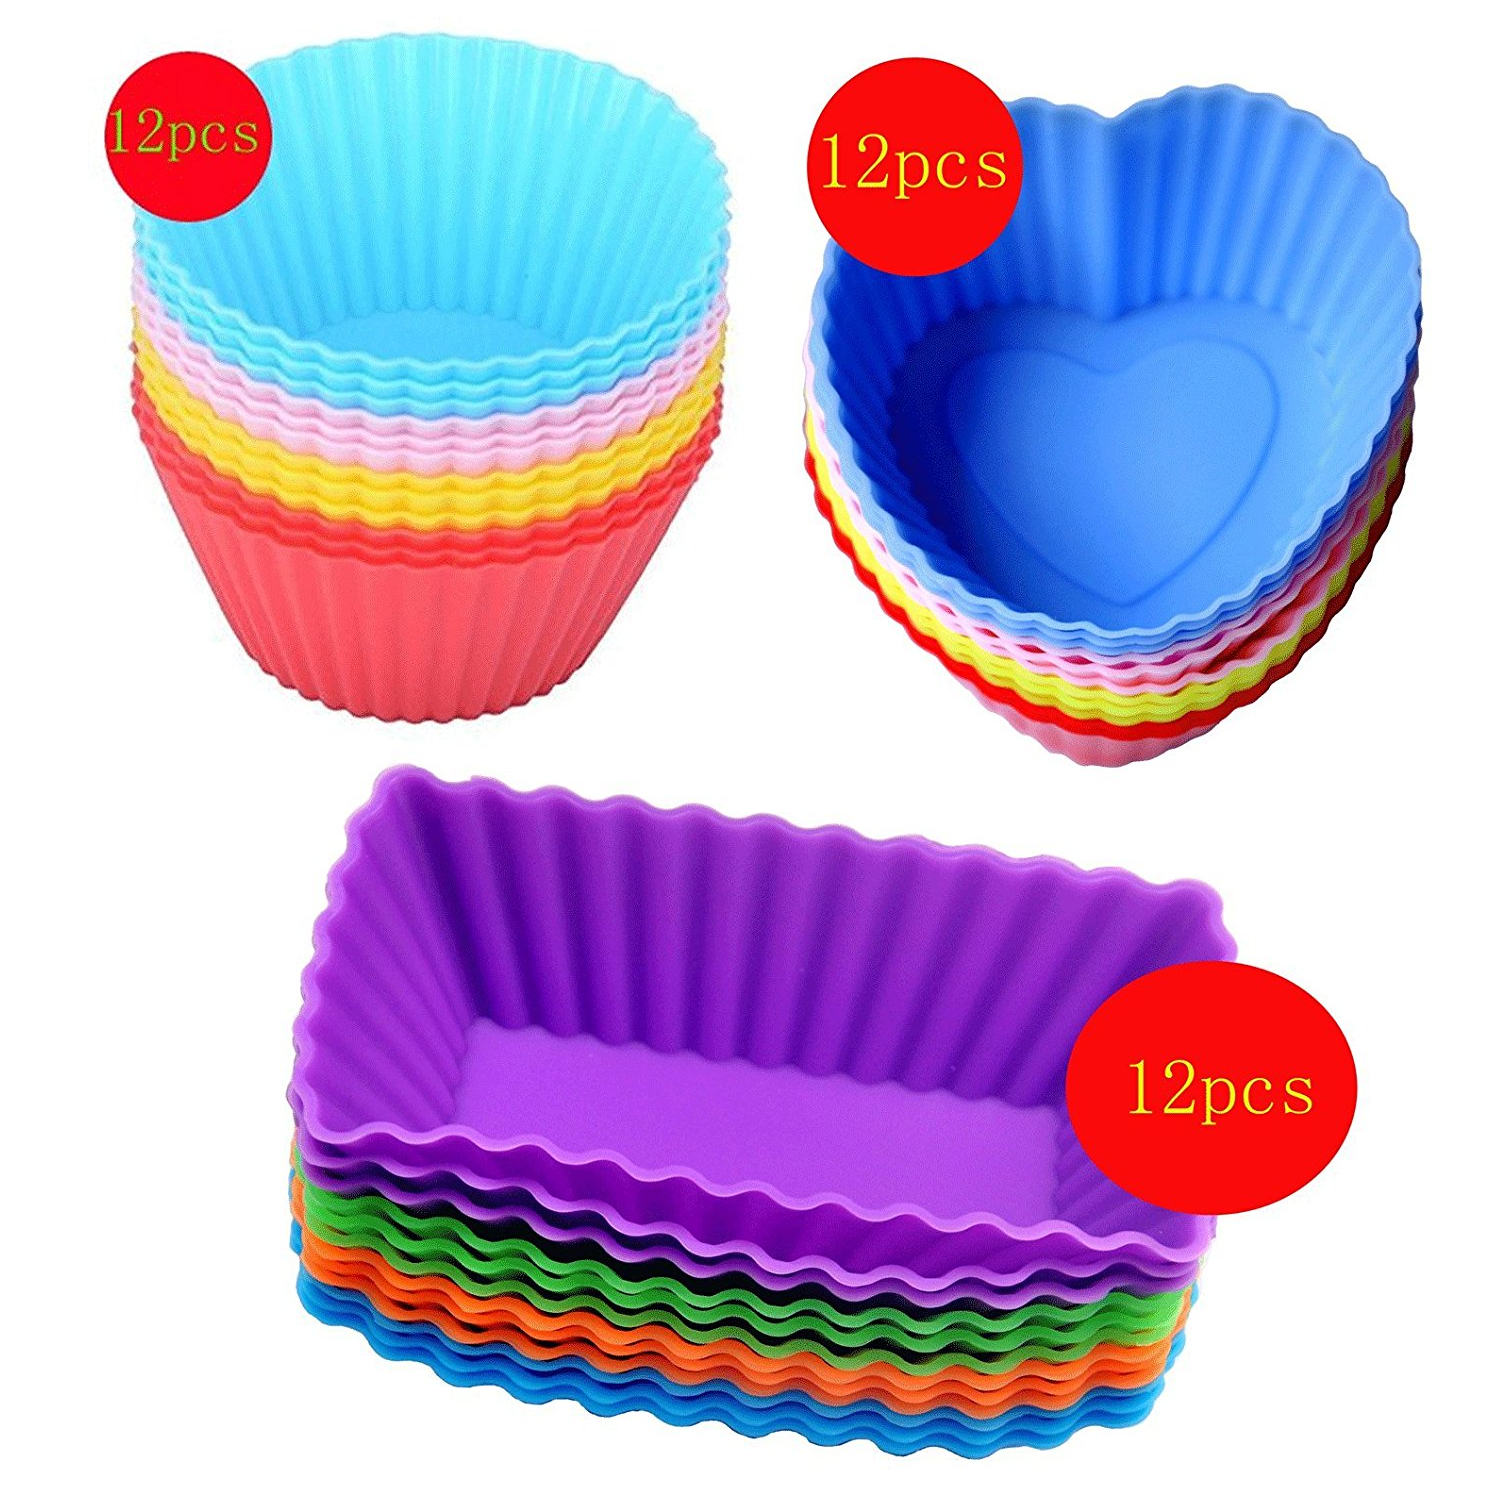 Silicone Baking Cup Deals on Amazon! Pack of 36 Silicone Baking Cupcake Liners Only $6.99!